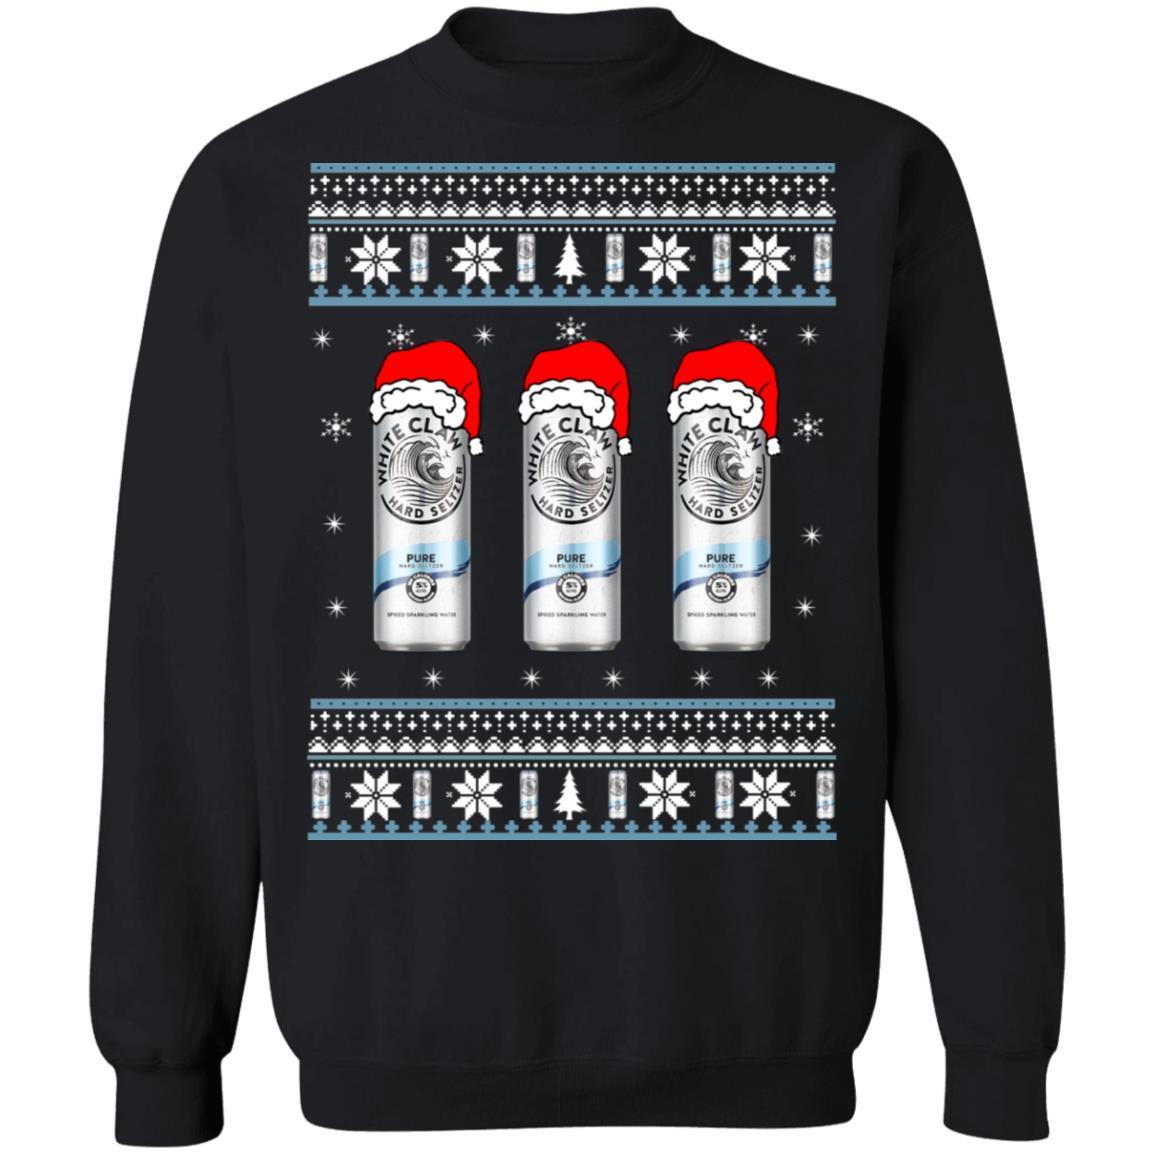 White Claw Pure Christmas Sweater